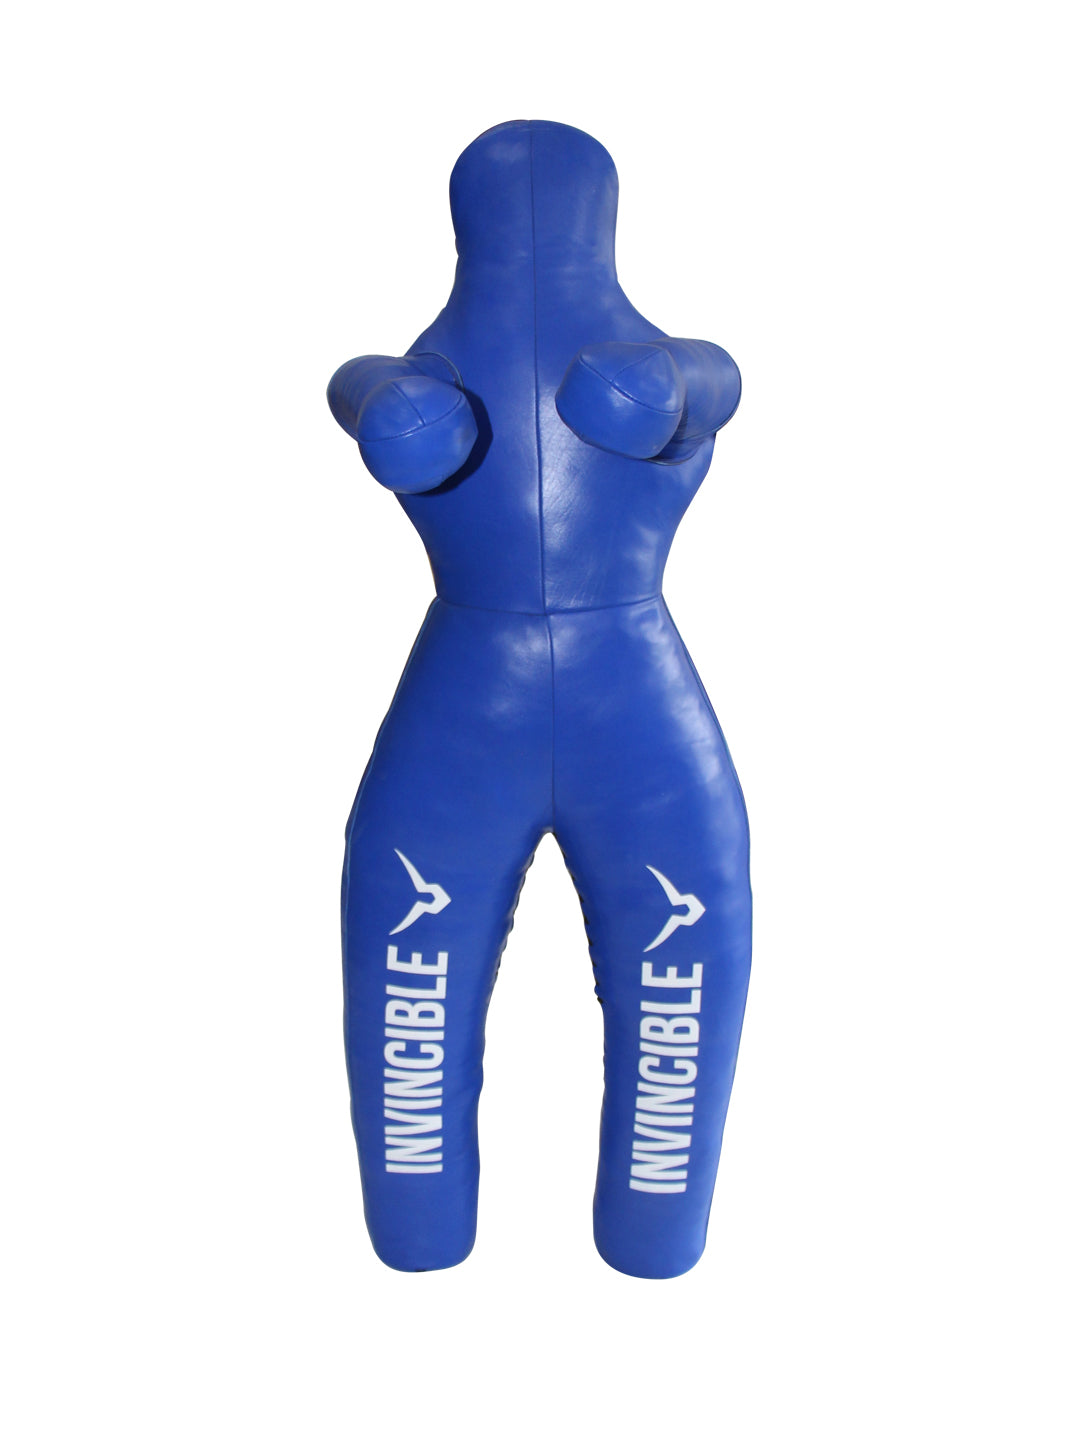 Invincible Wrestling Leather Dummy